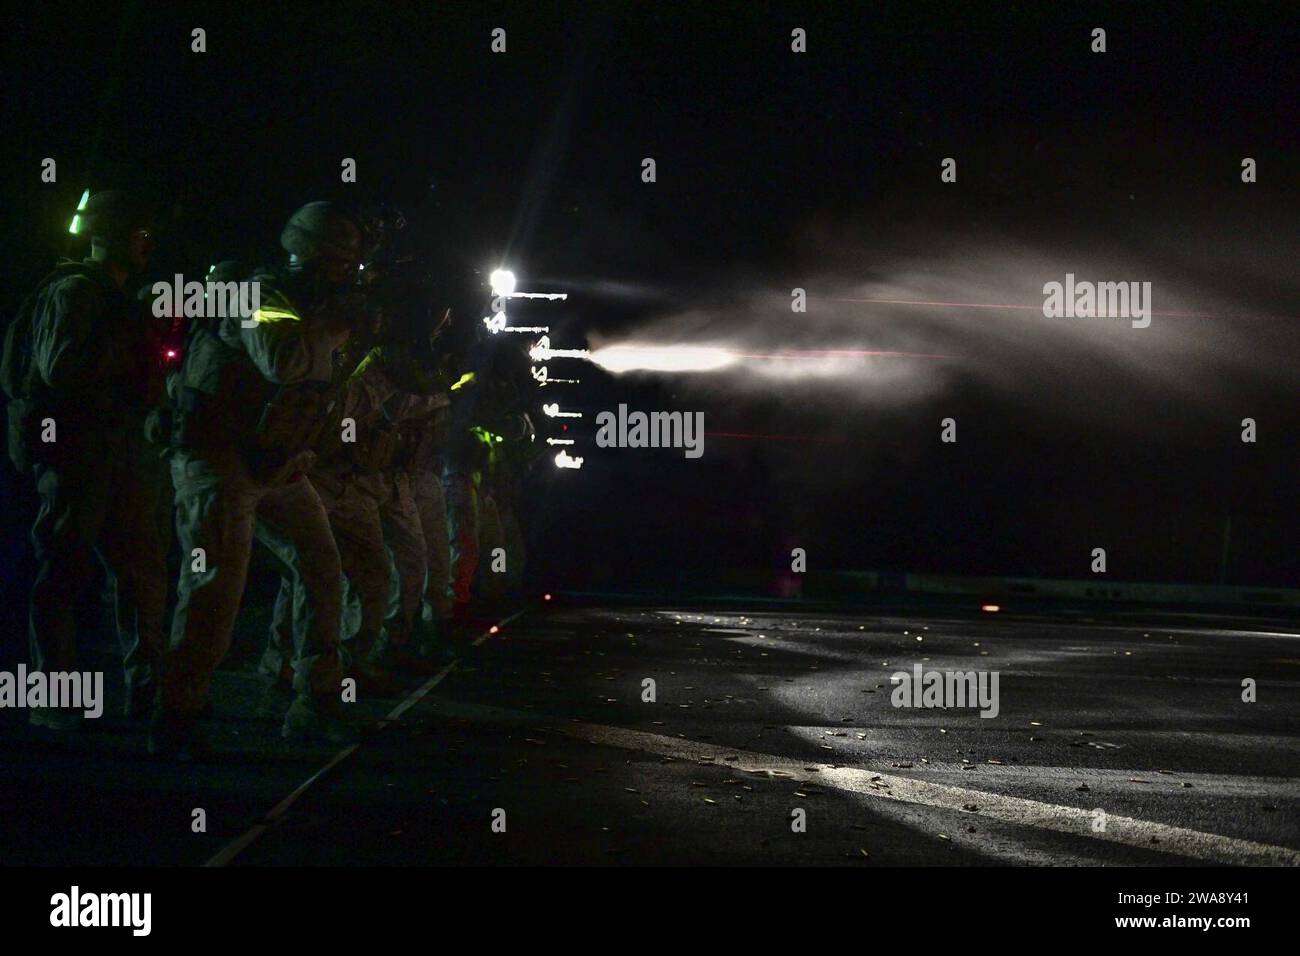 US military forces. 171118BK384-449 MEDITERRANEAN SEA (Nov. 18, 2017) U.S. Marines assigned to the 15th Marine Expeditionary Unit (MEU) participate in a low light live-fire exercise aboard the San Antonio-class amphibious transport dock ship USS San Diego (LPD 22) Nov. 18, 2017. San Diego is deployed with the America Amphibious Ready Group and the 15th MEU to support maritime security and theater security cooperation in efforts in the U.S. 6th Fleet area of operations. (U.S. Navy photo by Mass Communication Specialist 3rd Class Justin A. Schoenberger/Released) Stock Photo